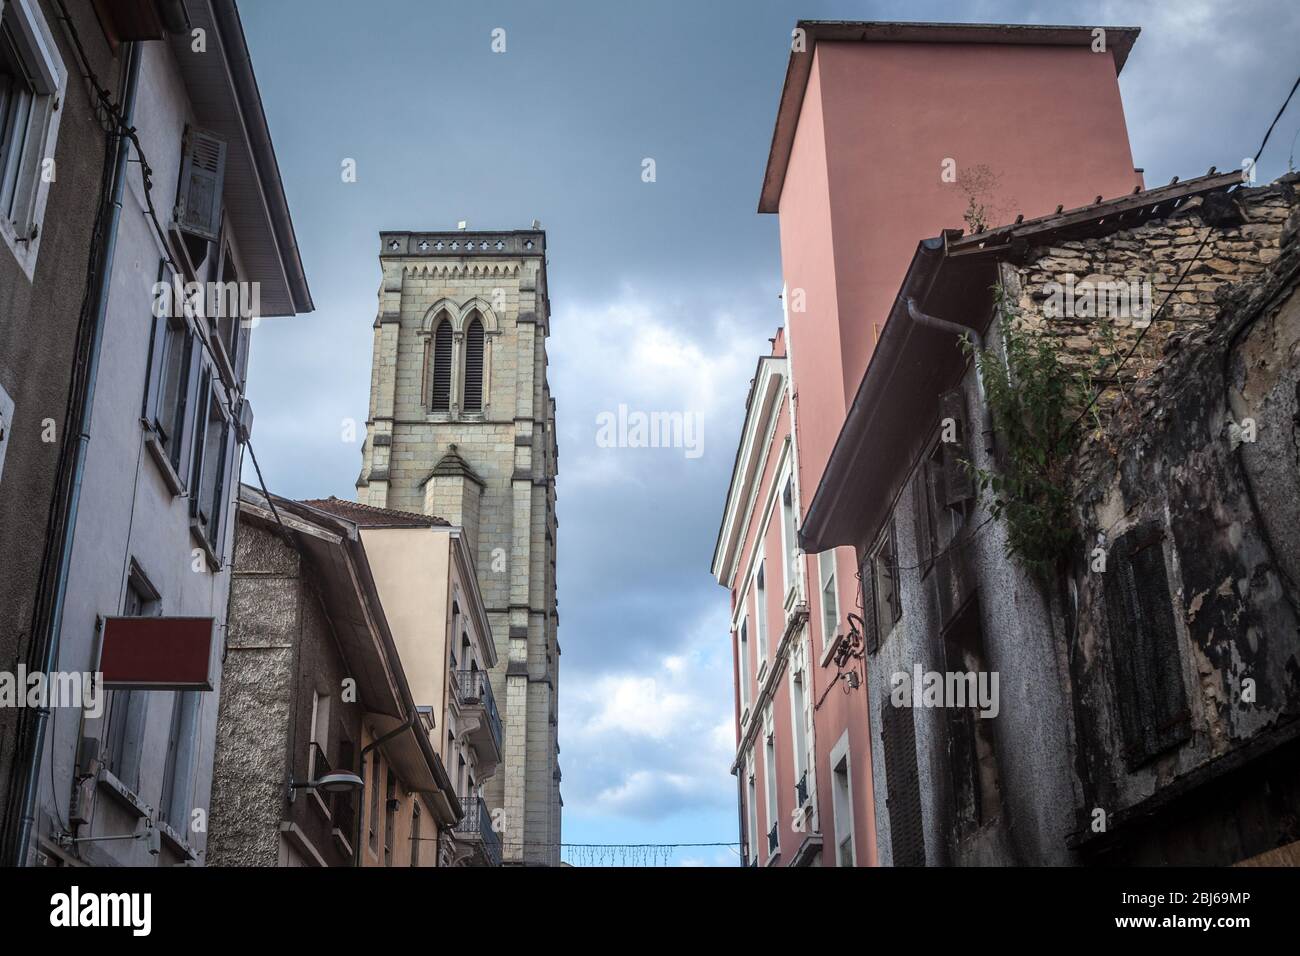 Eglise Saint Jean Baptiste Church in Bourgoin Jallieu, in Dauphine region,  in Isere Departement, France. It is the main catholic church of this city  Stock Photo - Alamy